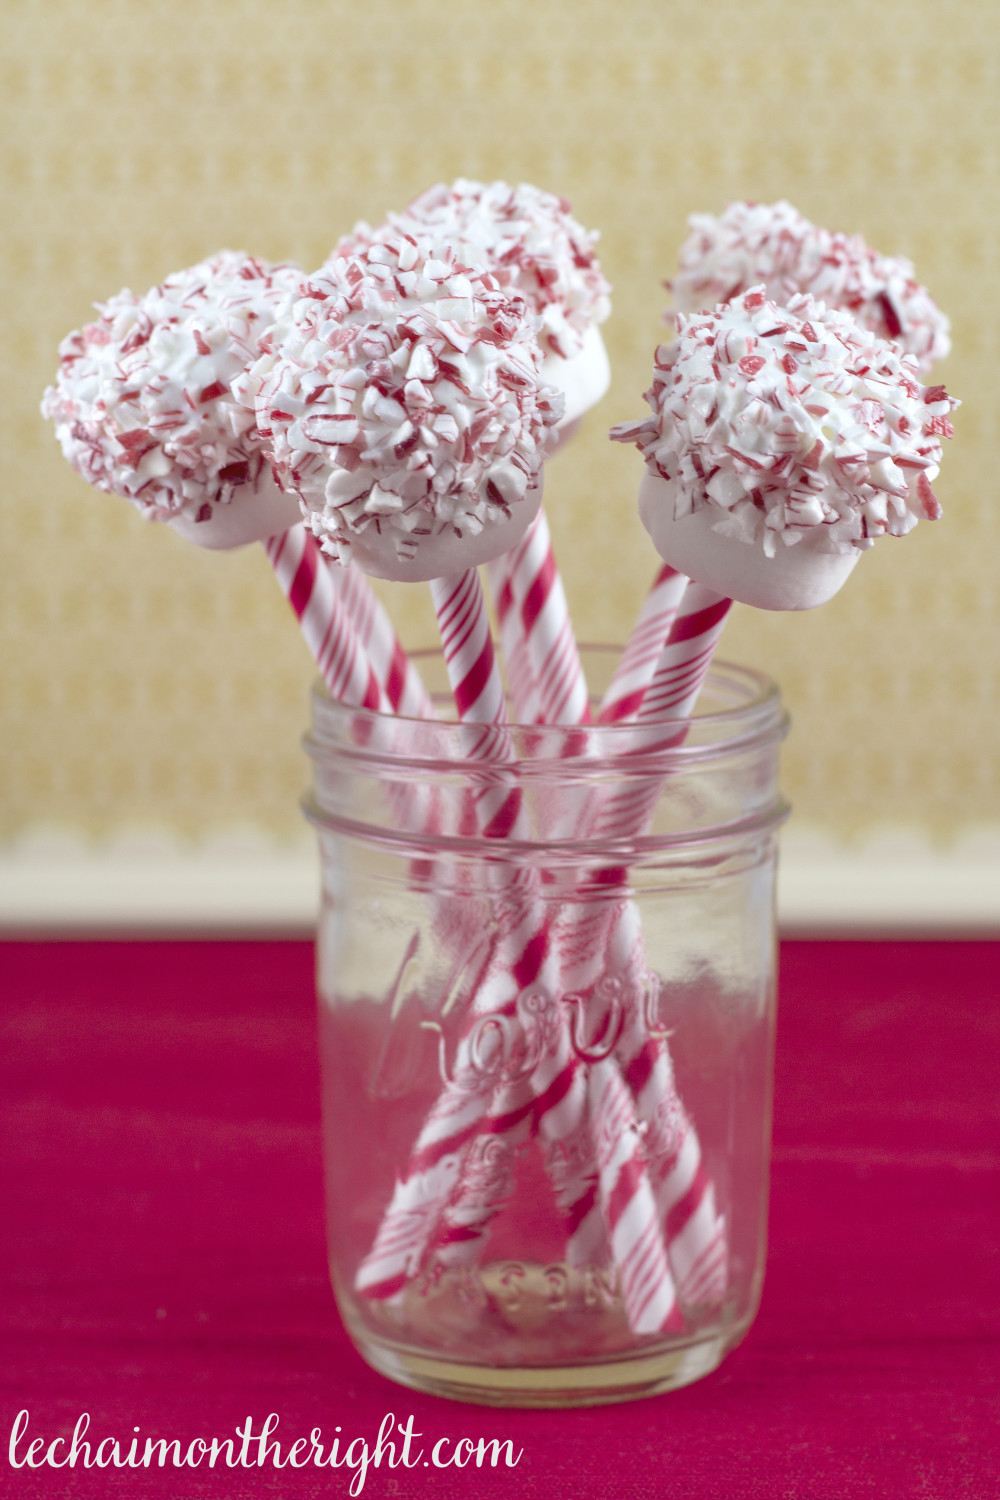 White Chocolate Peppermint Dipped Marshmallow Pops - Creative, Clever and Classy